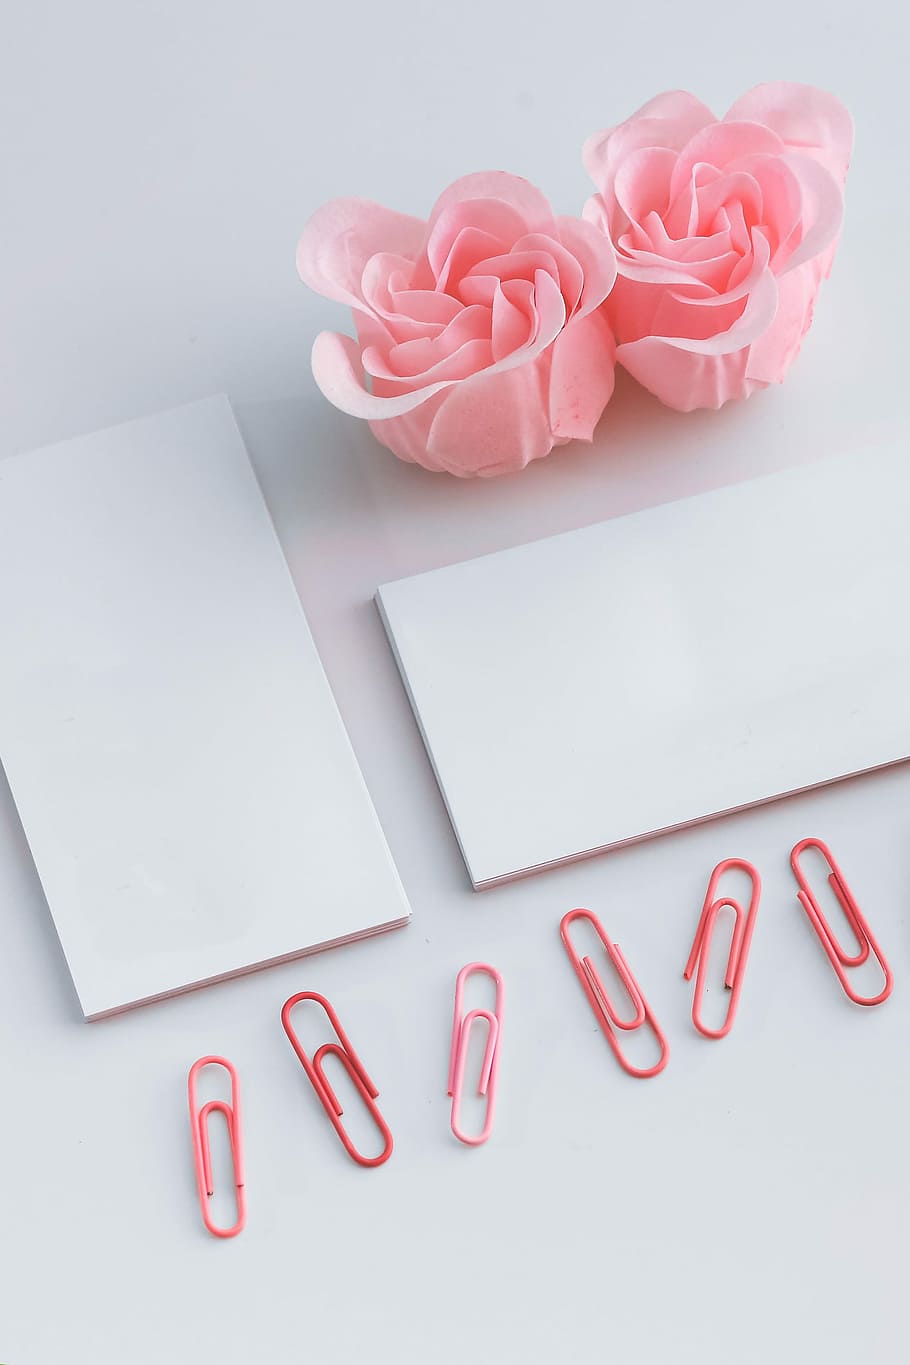 little, sheets, paper, pink, paper clips, pink paper, female, roses, minimal, copy space